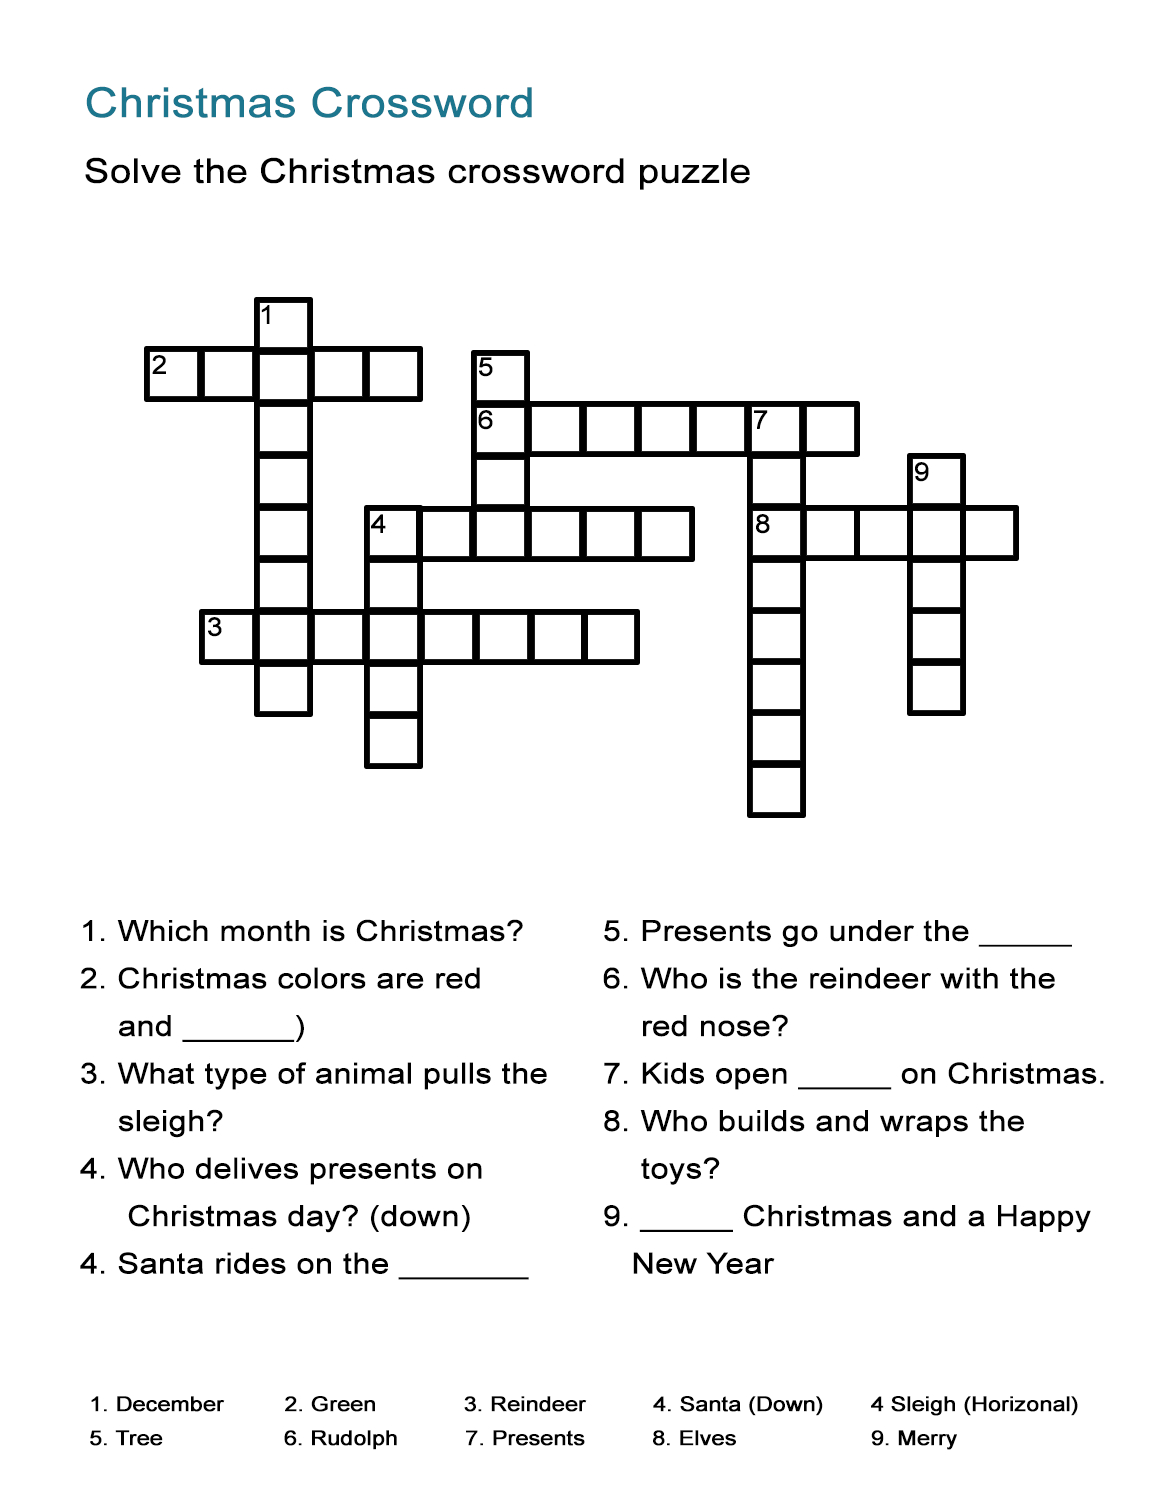 Crosspatch Xmas Printable Puzzle Support Vocab Development And